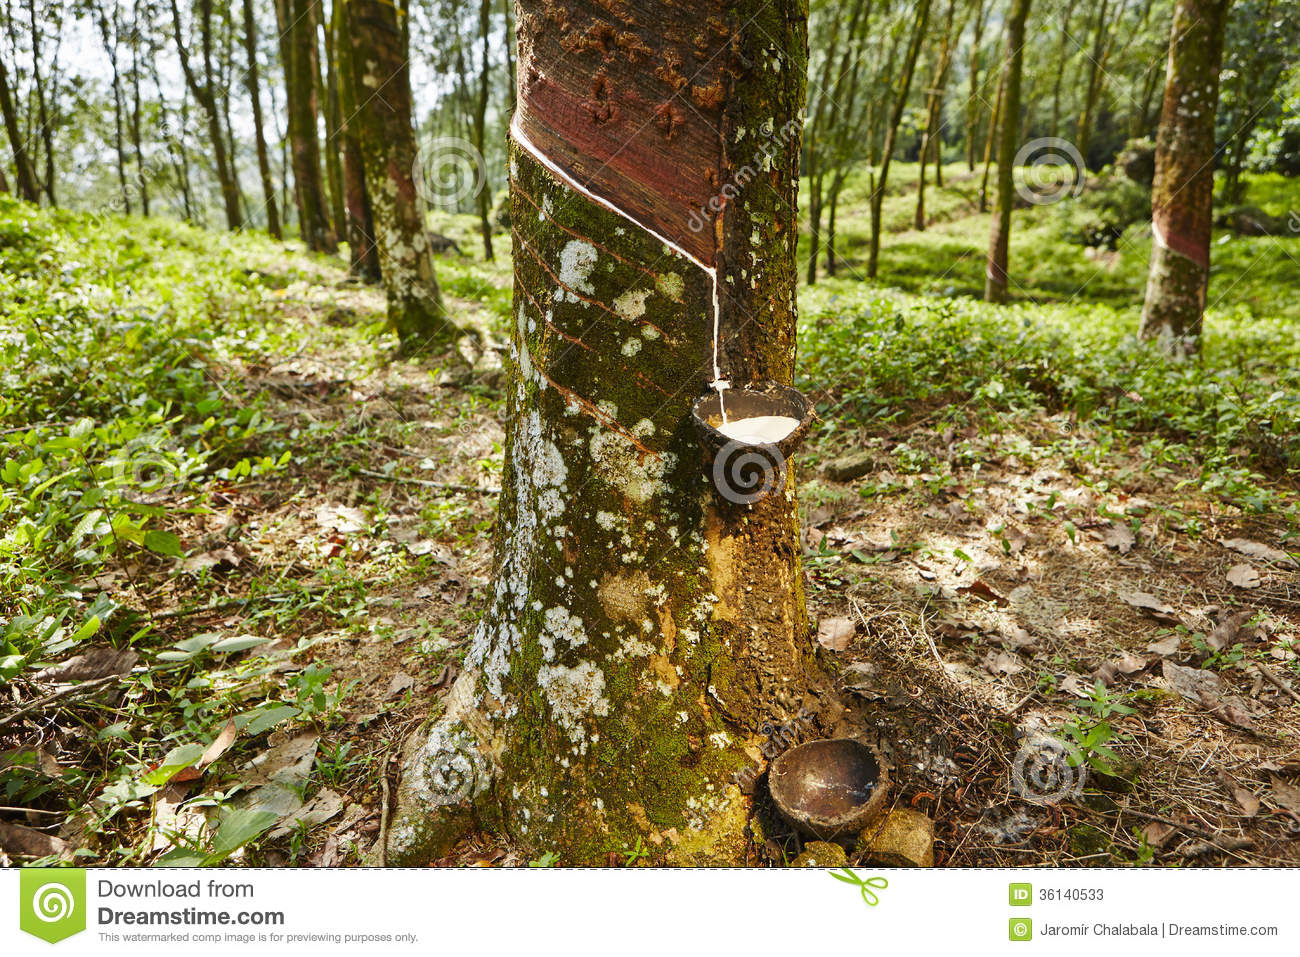 Tapping Sap From The Rubber Tree In Sri Lanka 